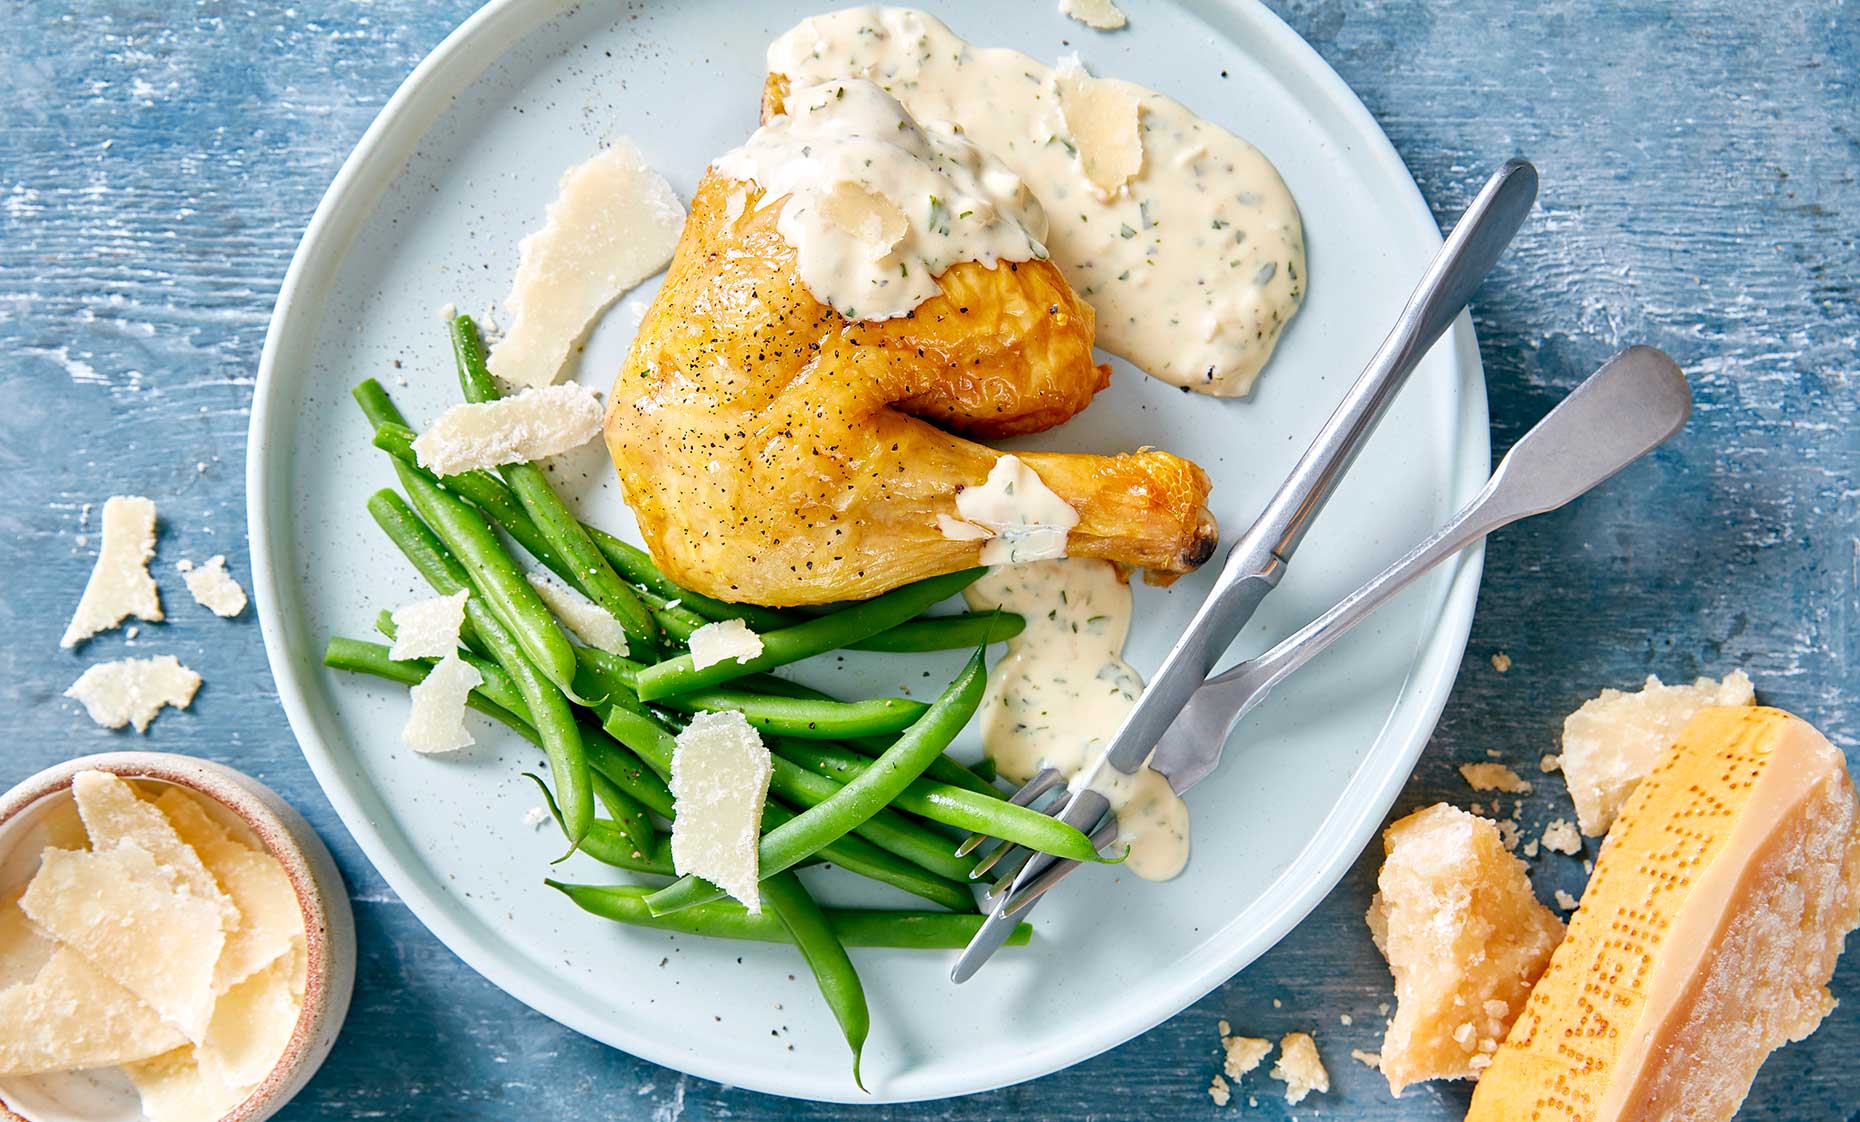 Roast chicken with lemon, herb and Parmesan sauce (Image: Photographed and styled at Steve Lee Studios, courtesy of Parmigiano Reggiano)